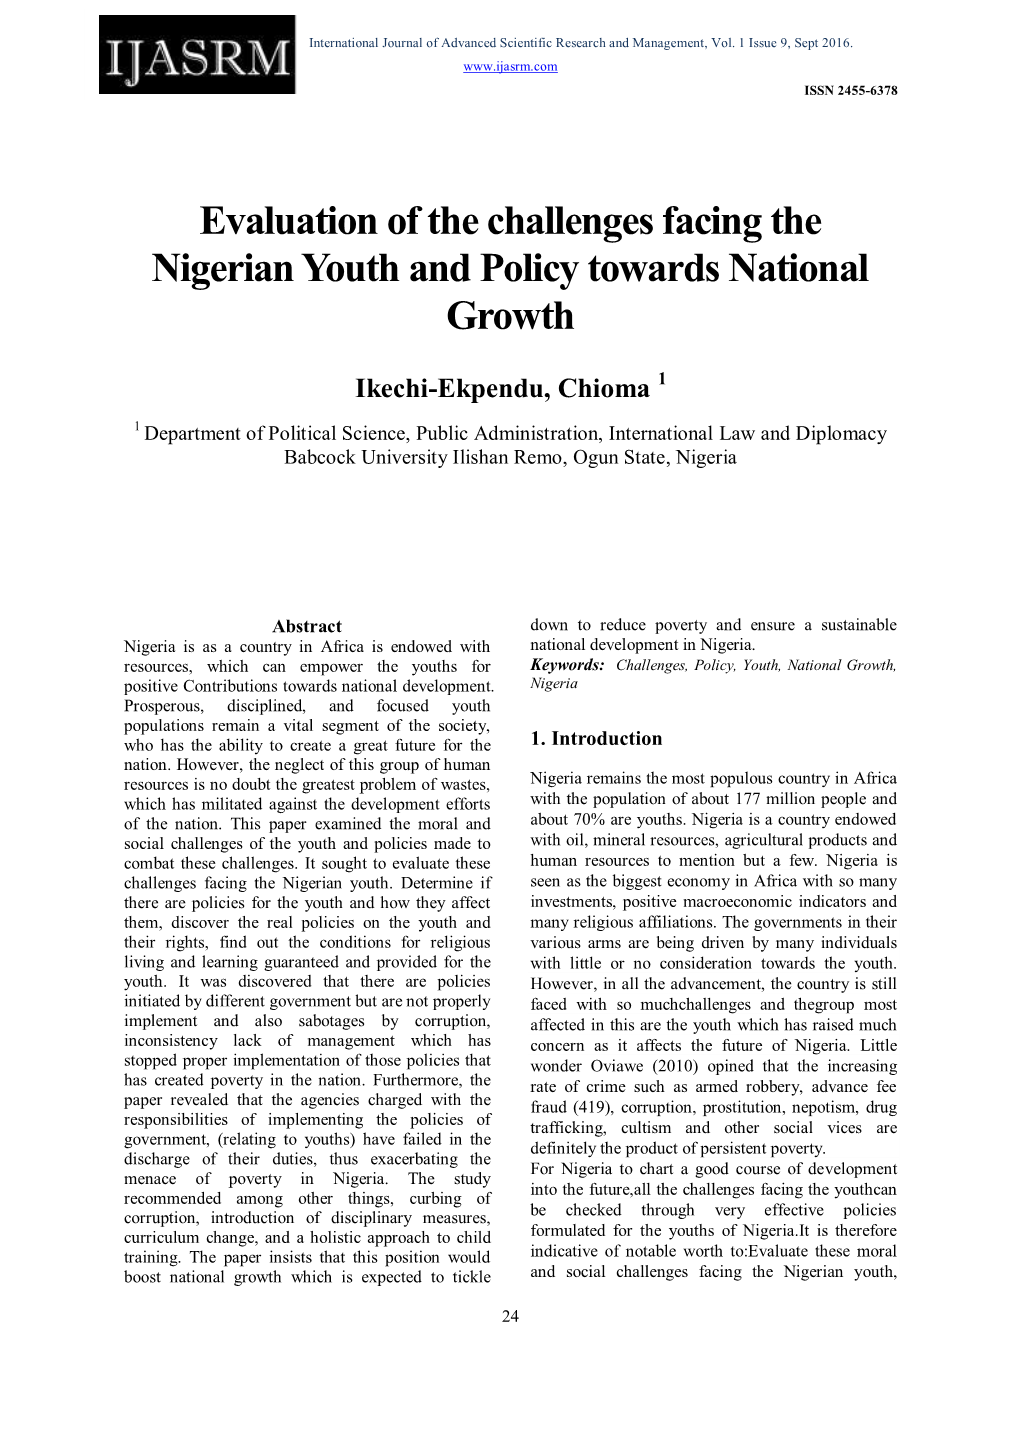 Evaluation of the Challenges Facing the Nigerian Youth and Policy Towards National Growth